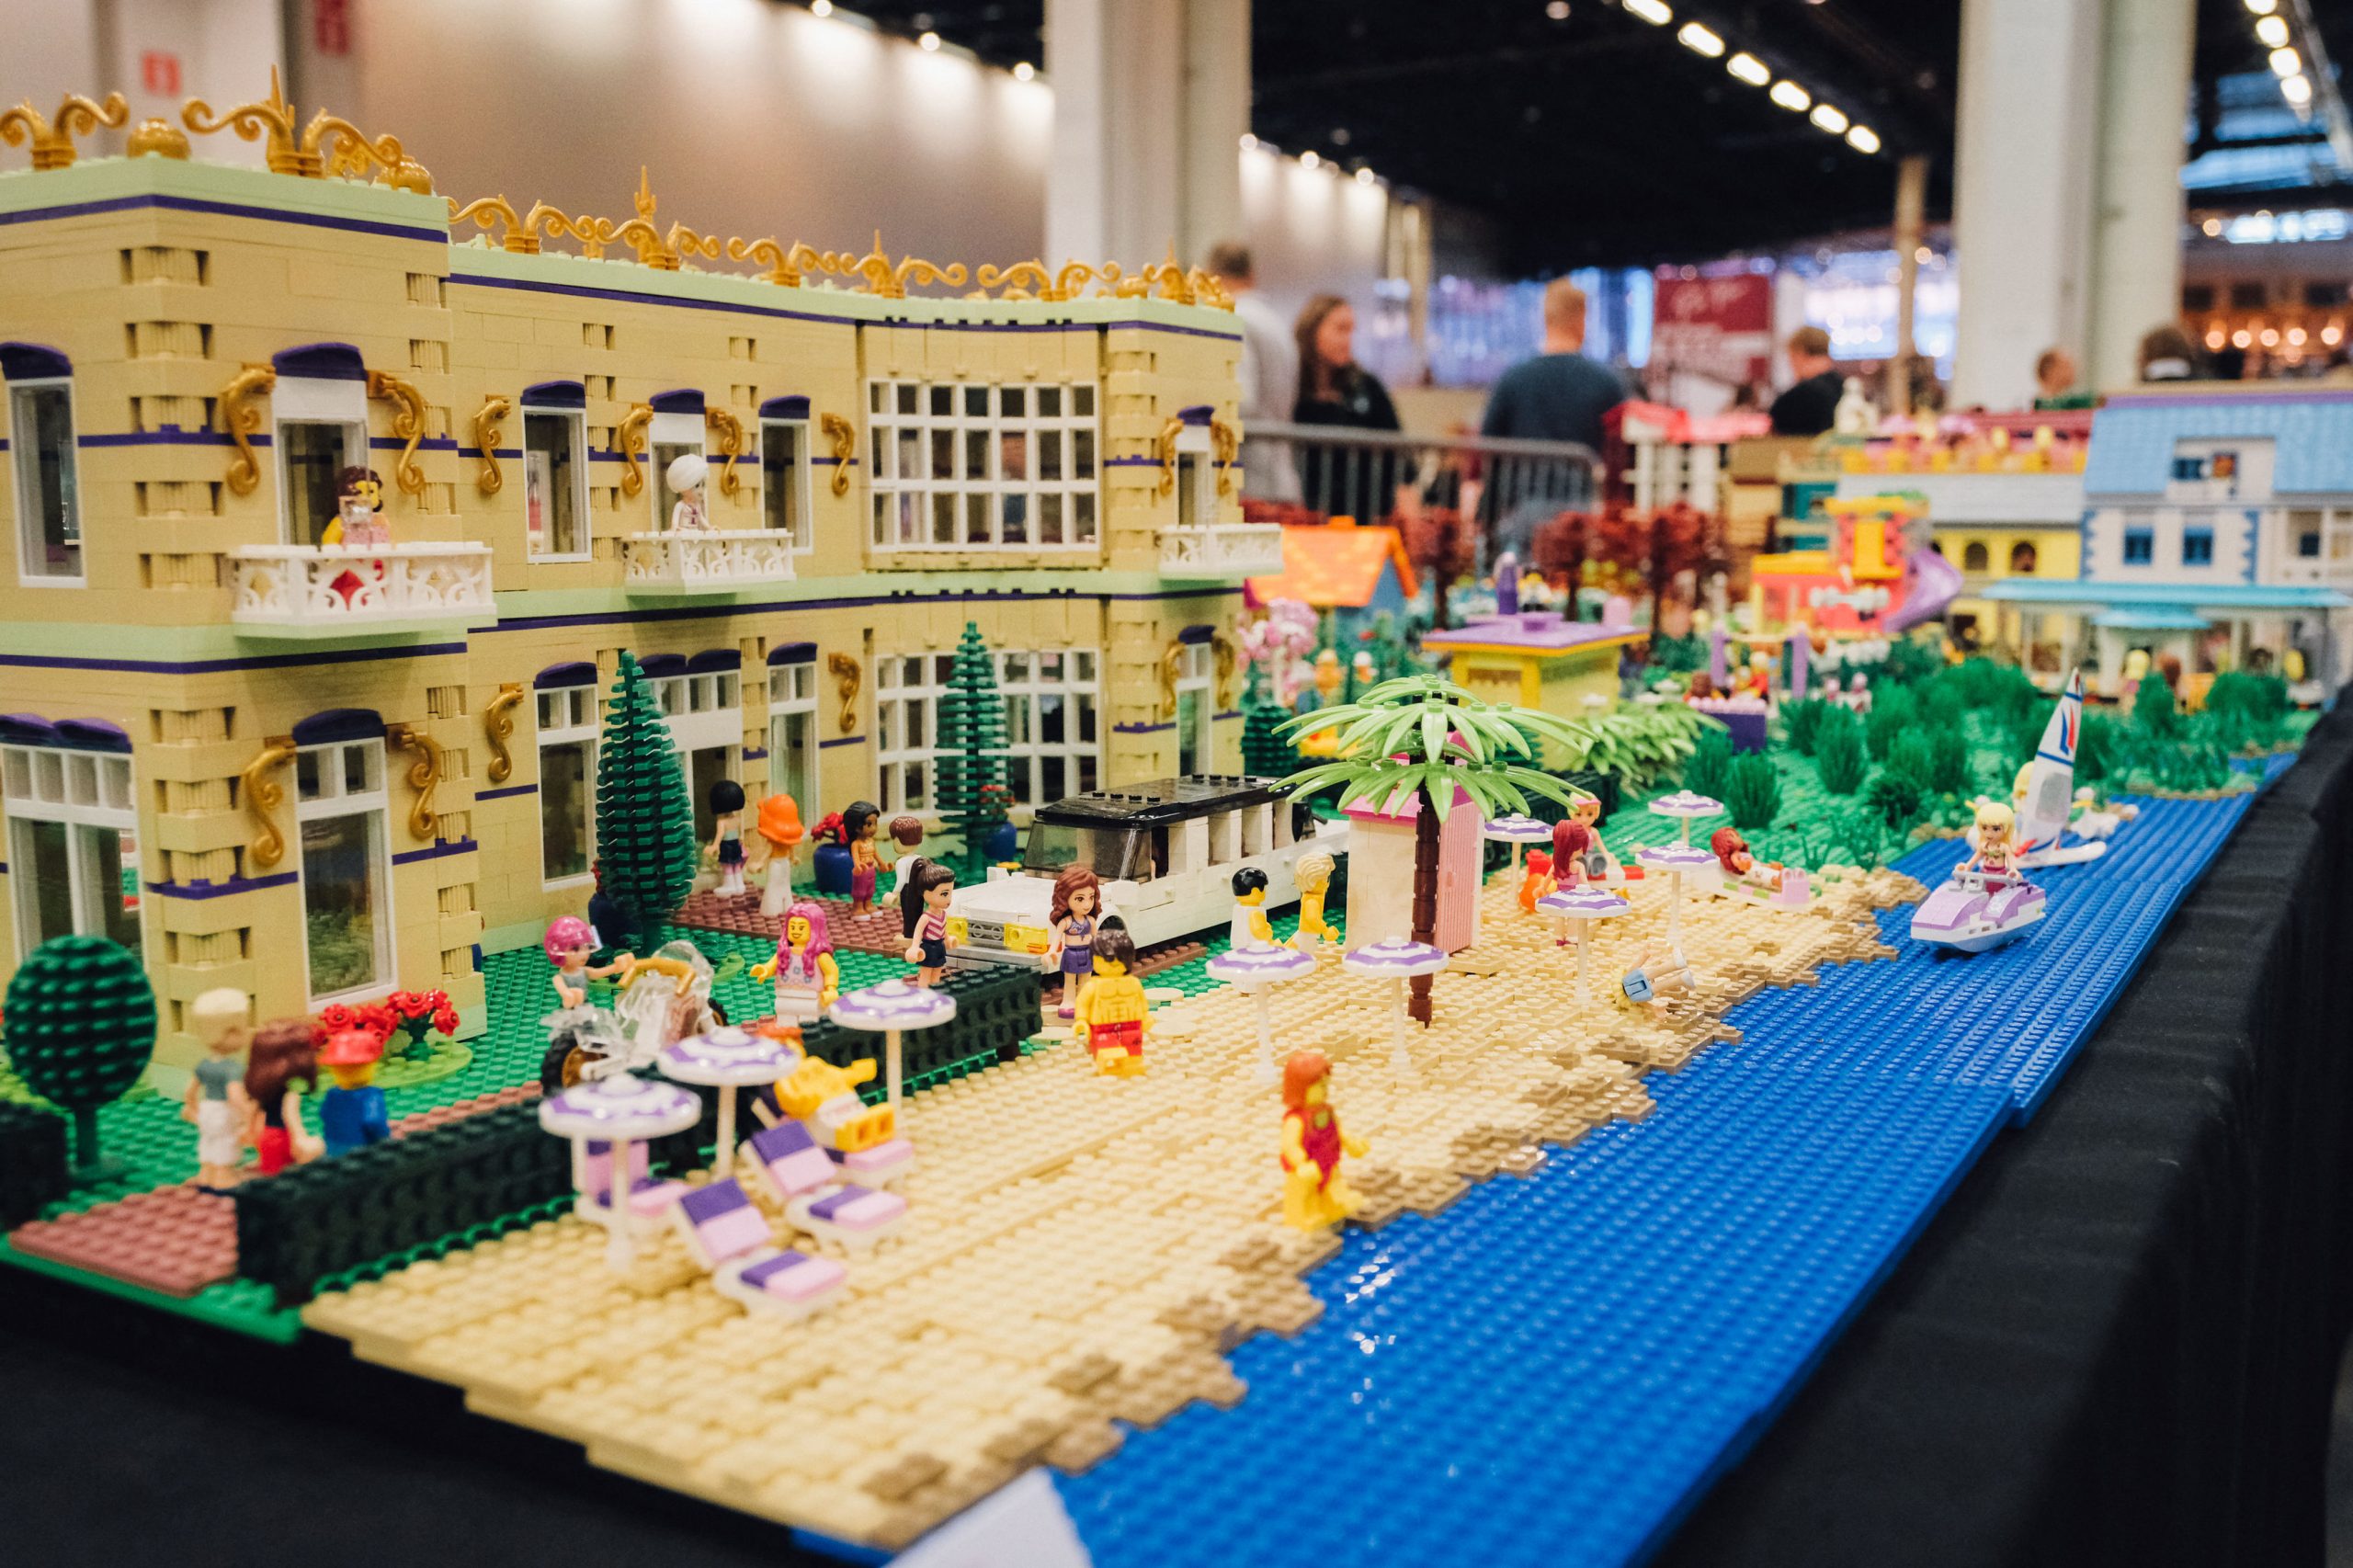 Lego posts record profit in 2020 as lockdowns spur play